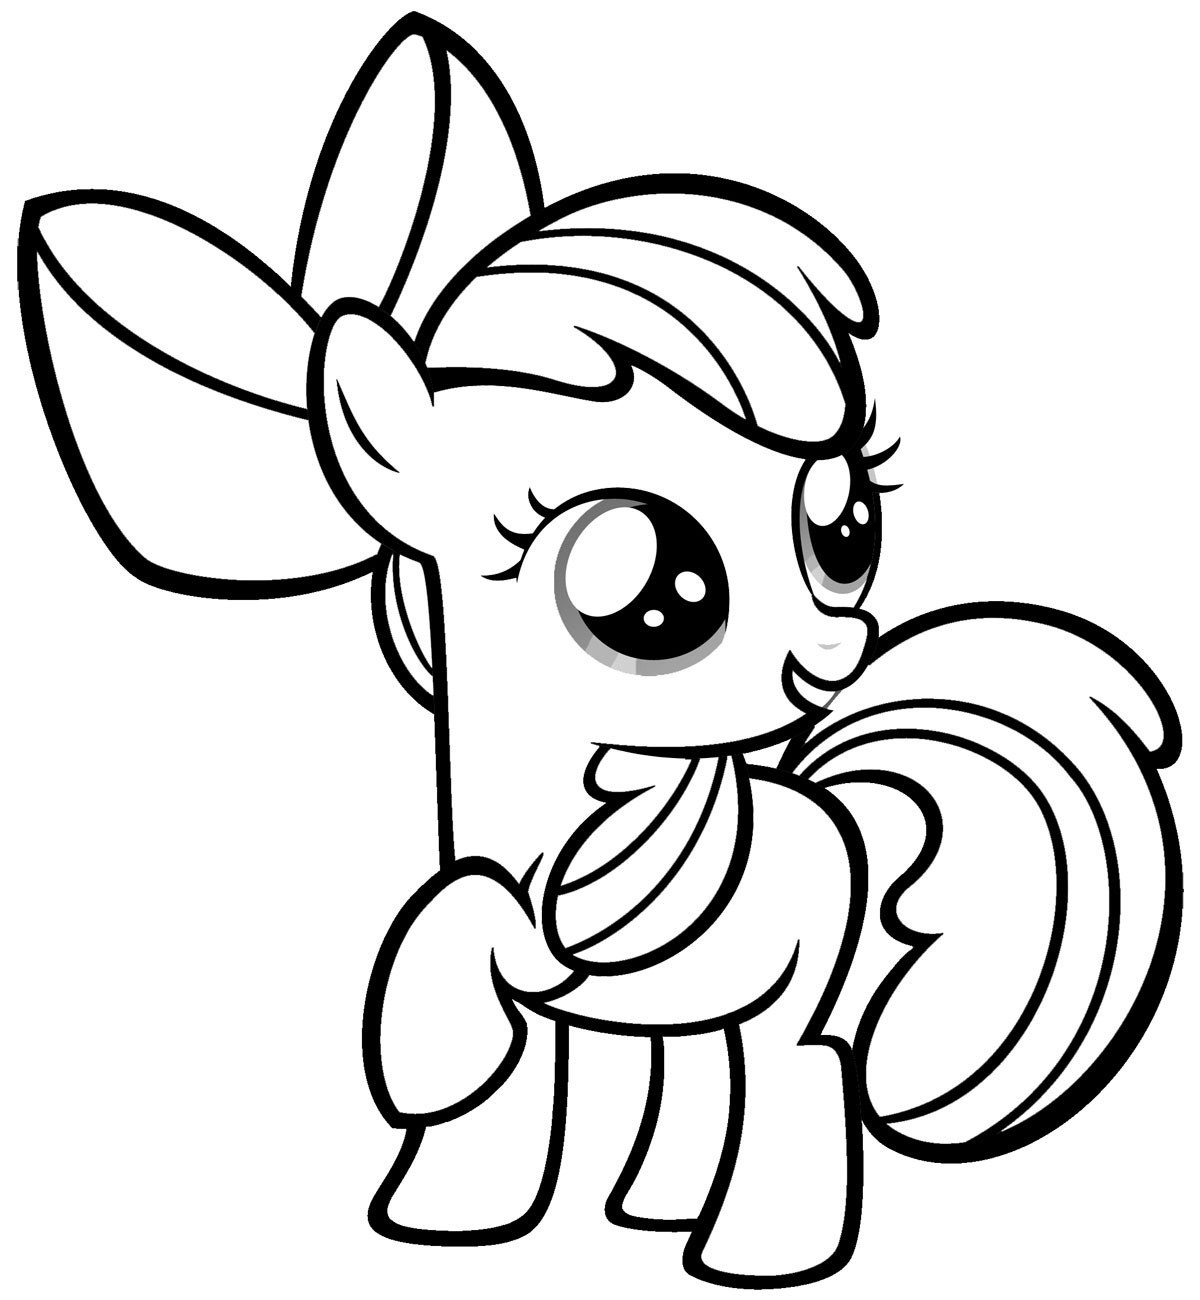 Coloring Pages Of My Little Pony
 Free Printable My Little Pony Coloring Pages For Kids